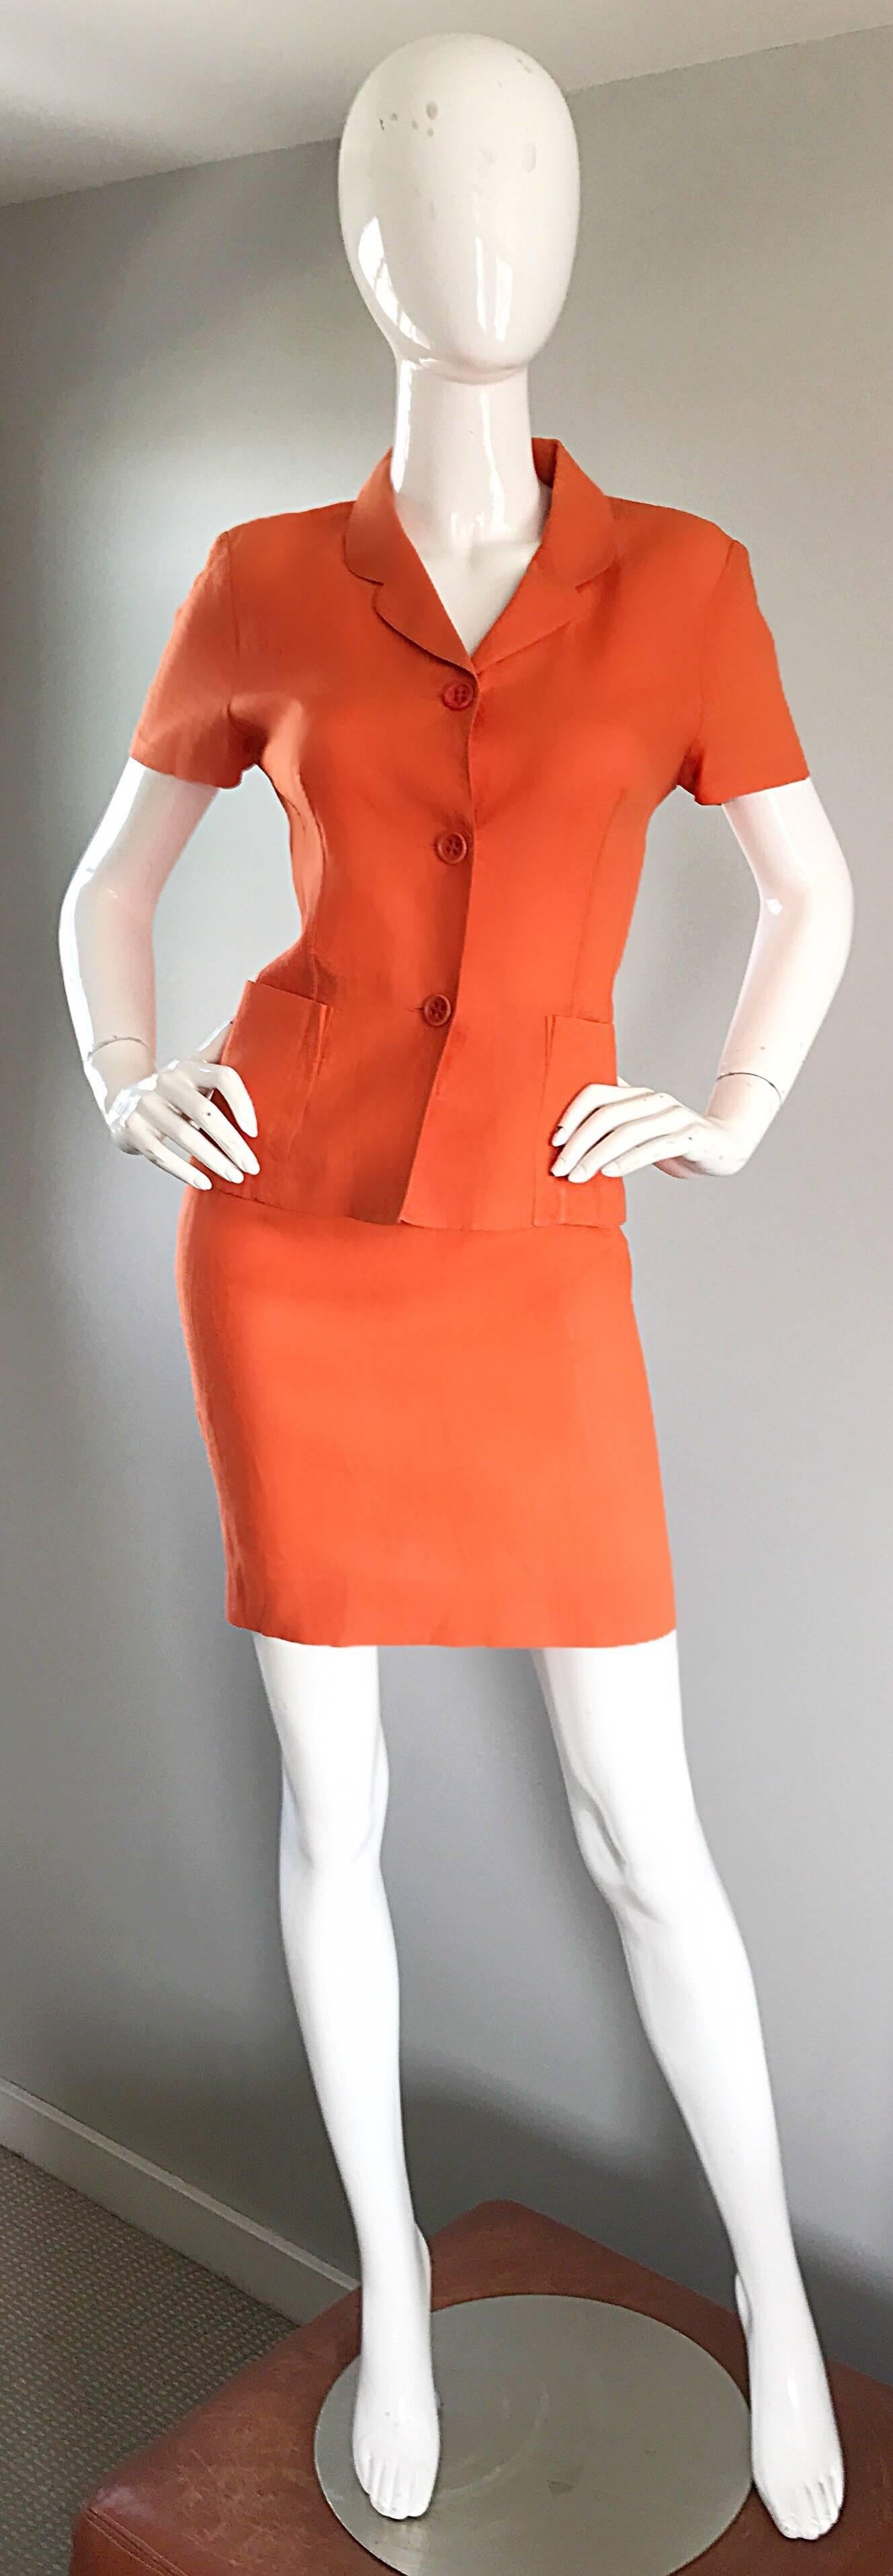 Chic 90s KENZO bright orange linen blend short sleeve skirt suit! Features a bright orange color on a luxurious linen (83%) and nylon (17%) blend. Buttons up the front, and ties in the back can adjust the size. Pocket at each side of the waist. High